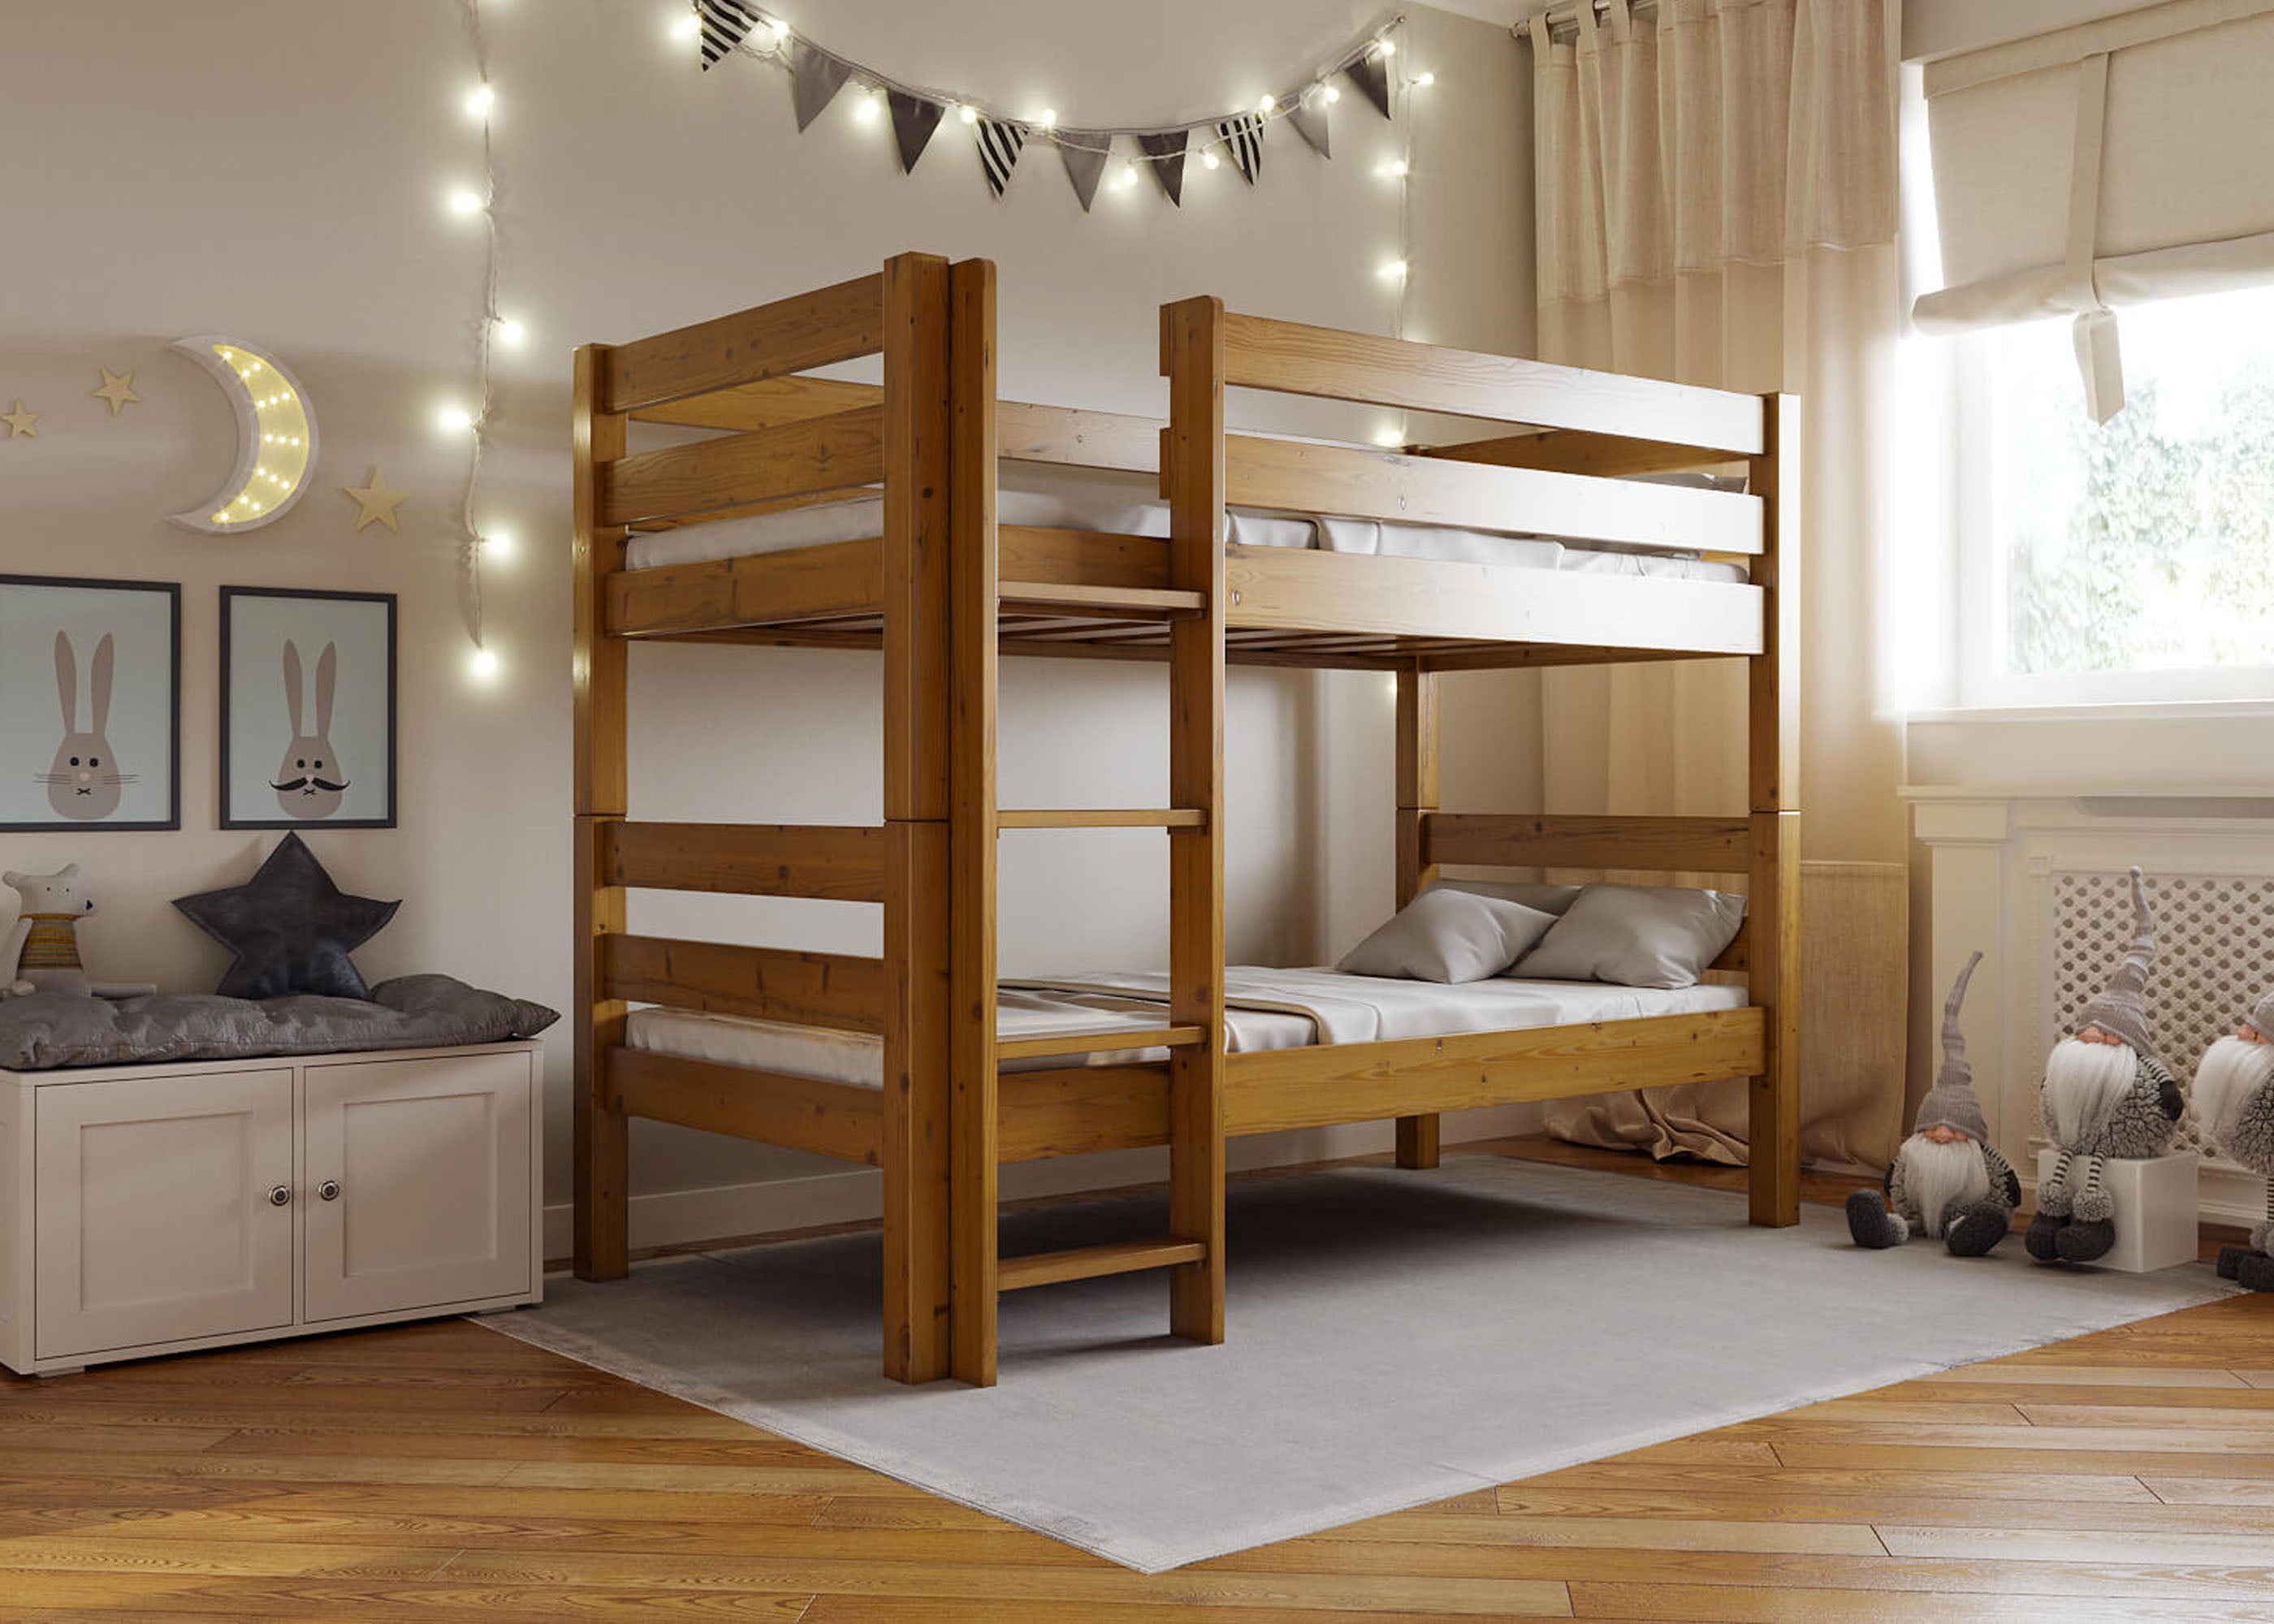 Extra Strong Wooden Bunk Bed With Mattresses | Reinforced Beds